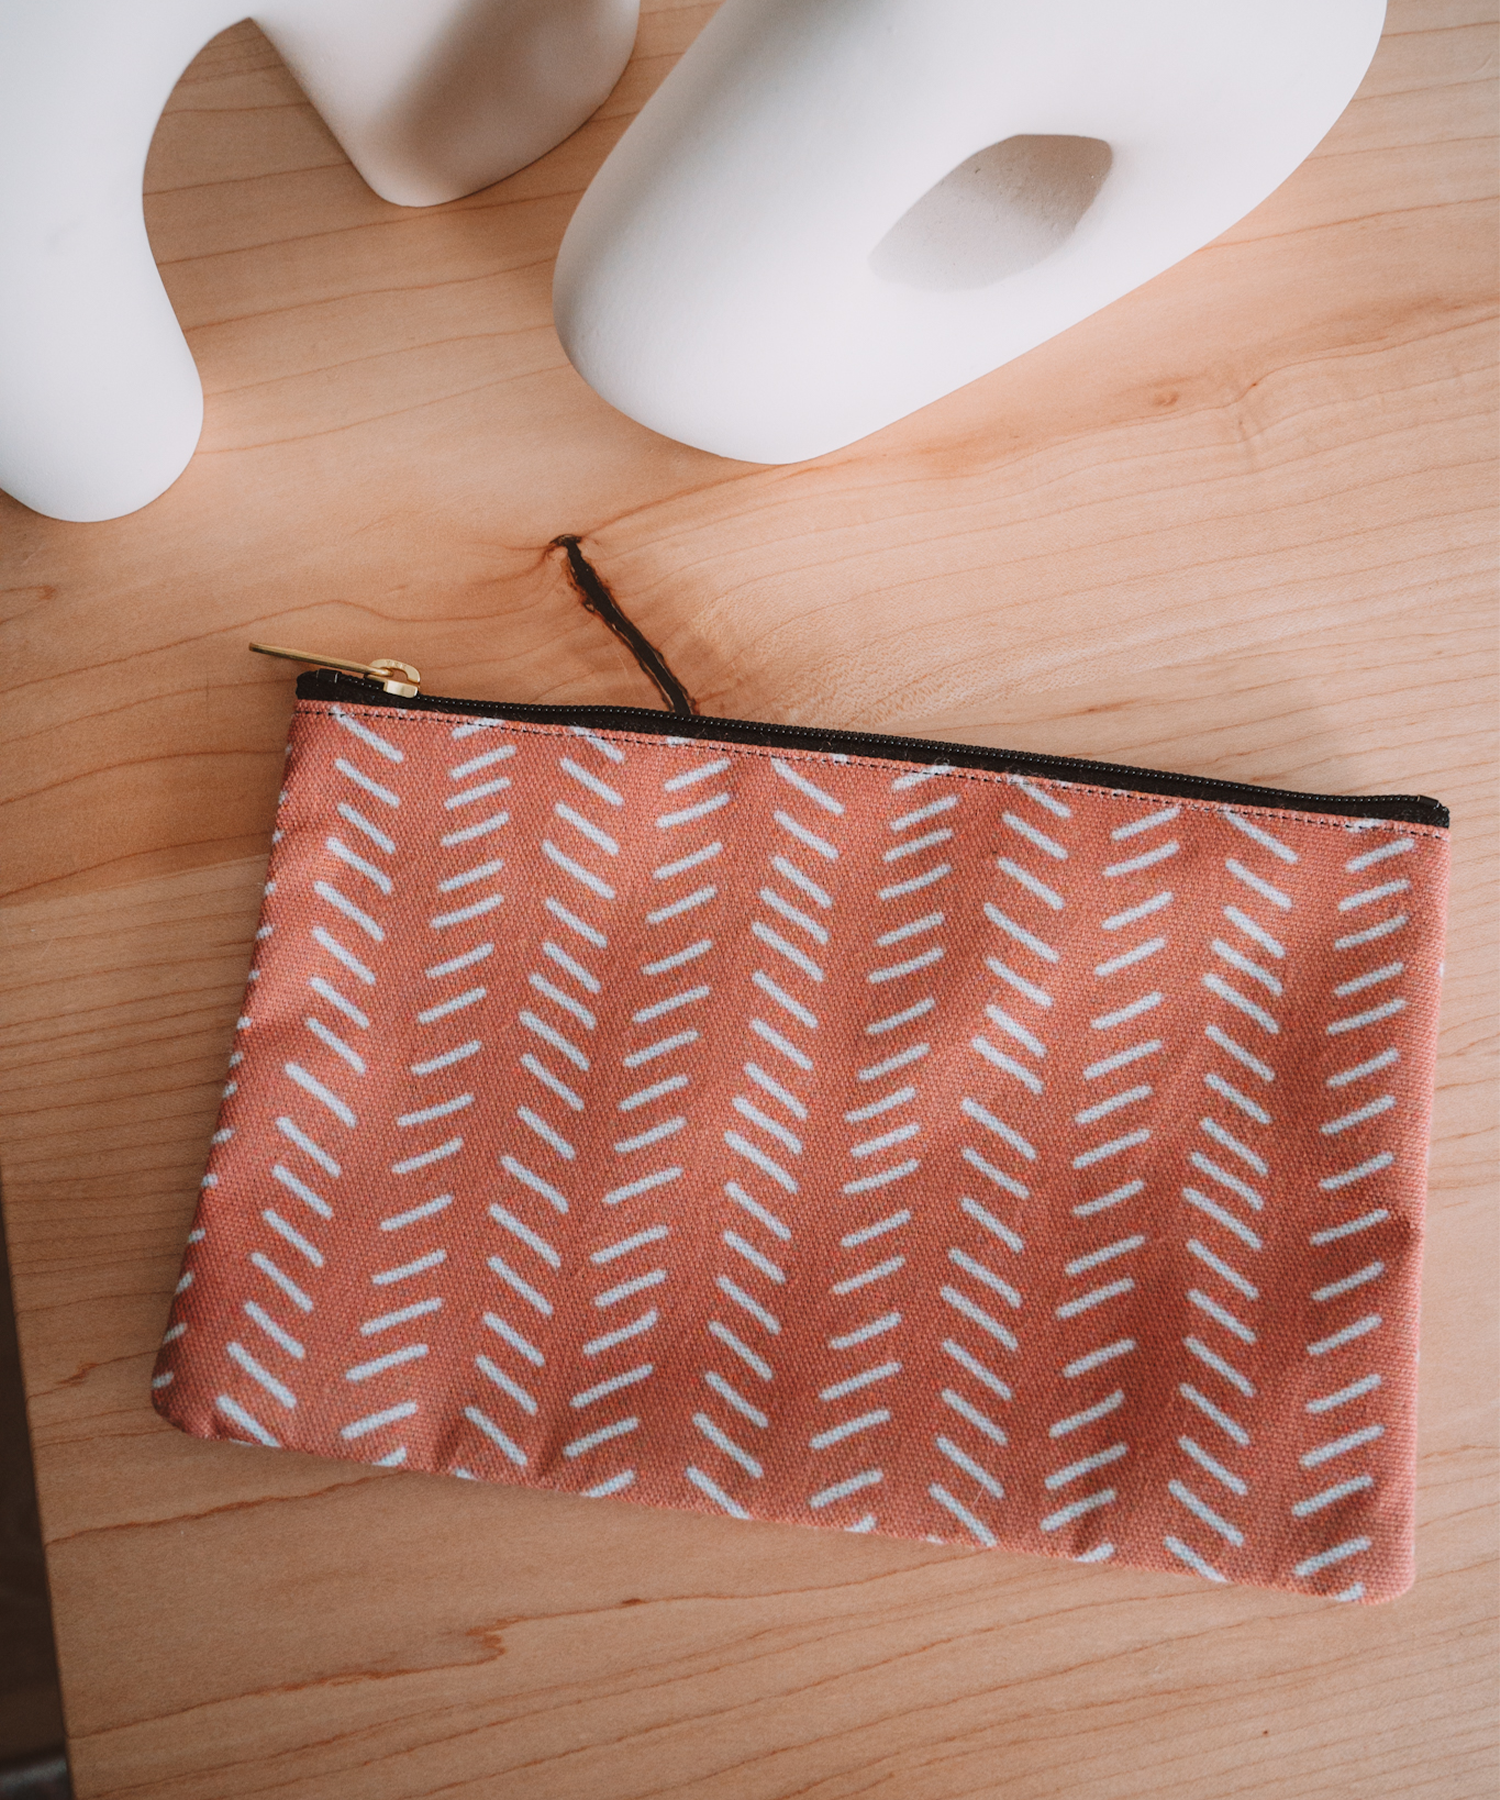 The Harrow accessory pouch is laying on a desk with two asymmetrical vases in the vackground